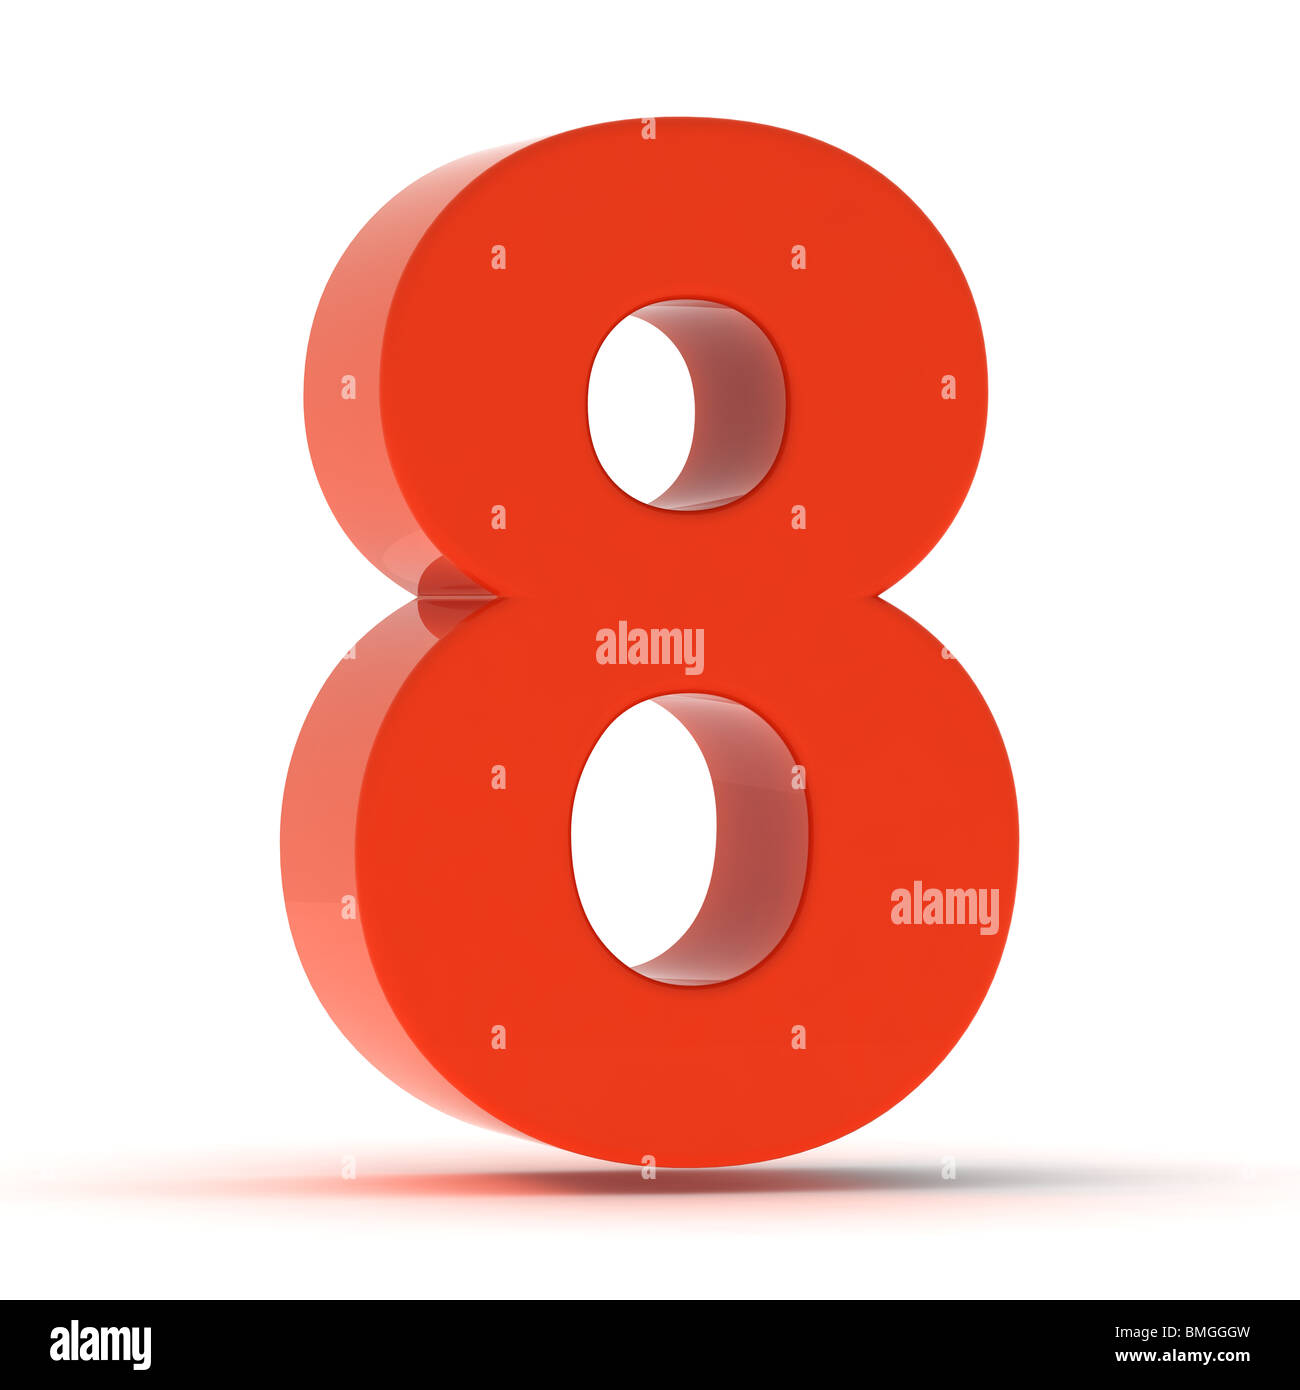 The Number 8 - Red Plastic Stock Photo - Alamy